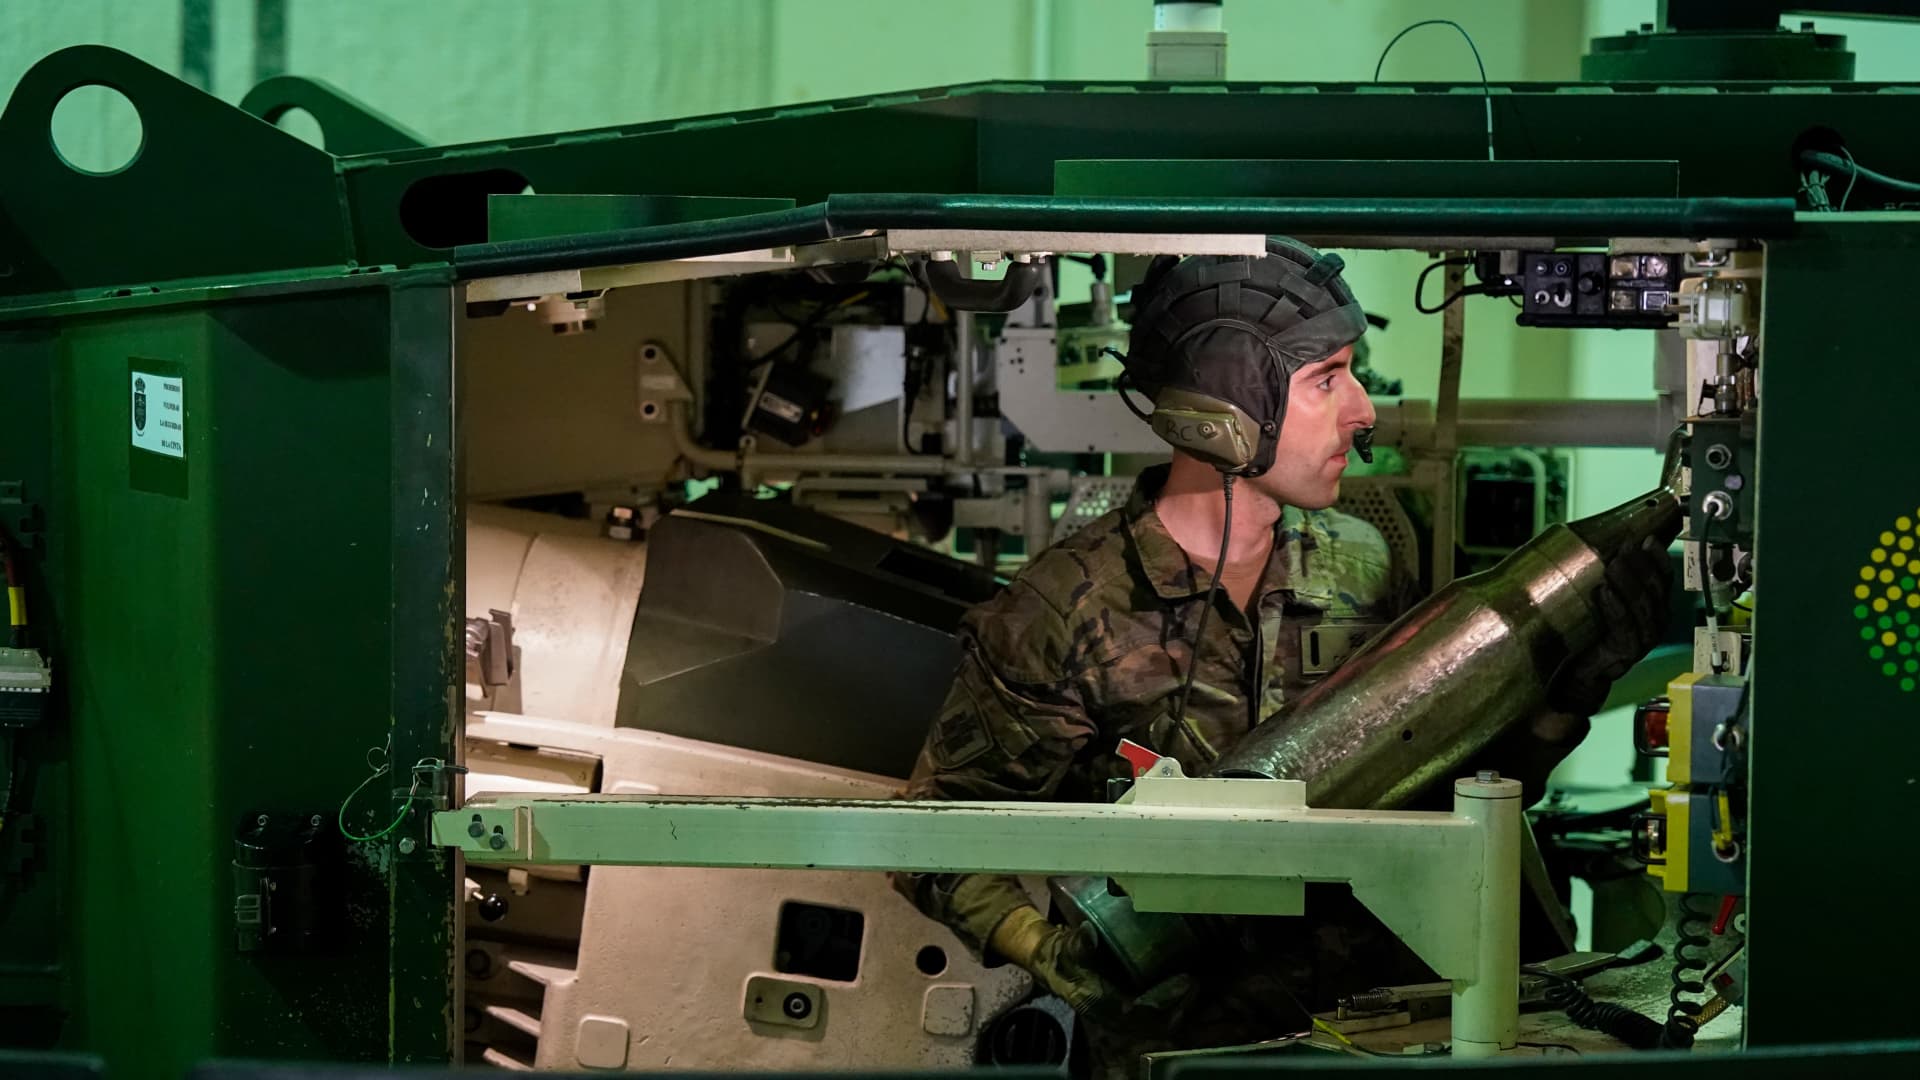 Spanish military personnel load dummy ammunition in a Leopard tank simulator during a training exercise, at the San Gregorio military base outside Zaragoza, Spain, on Monday, March 13, 2023.